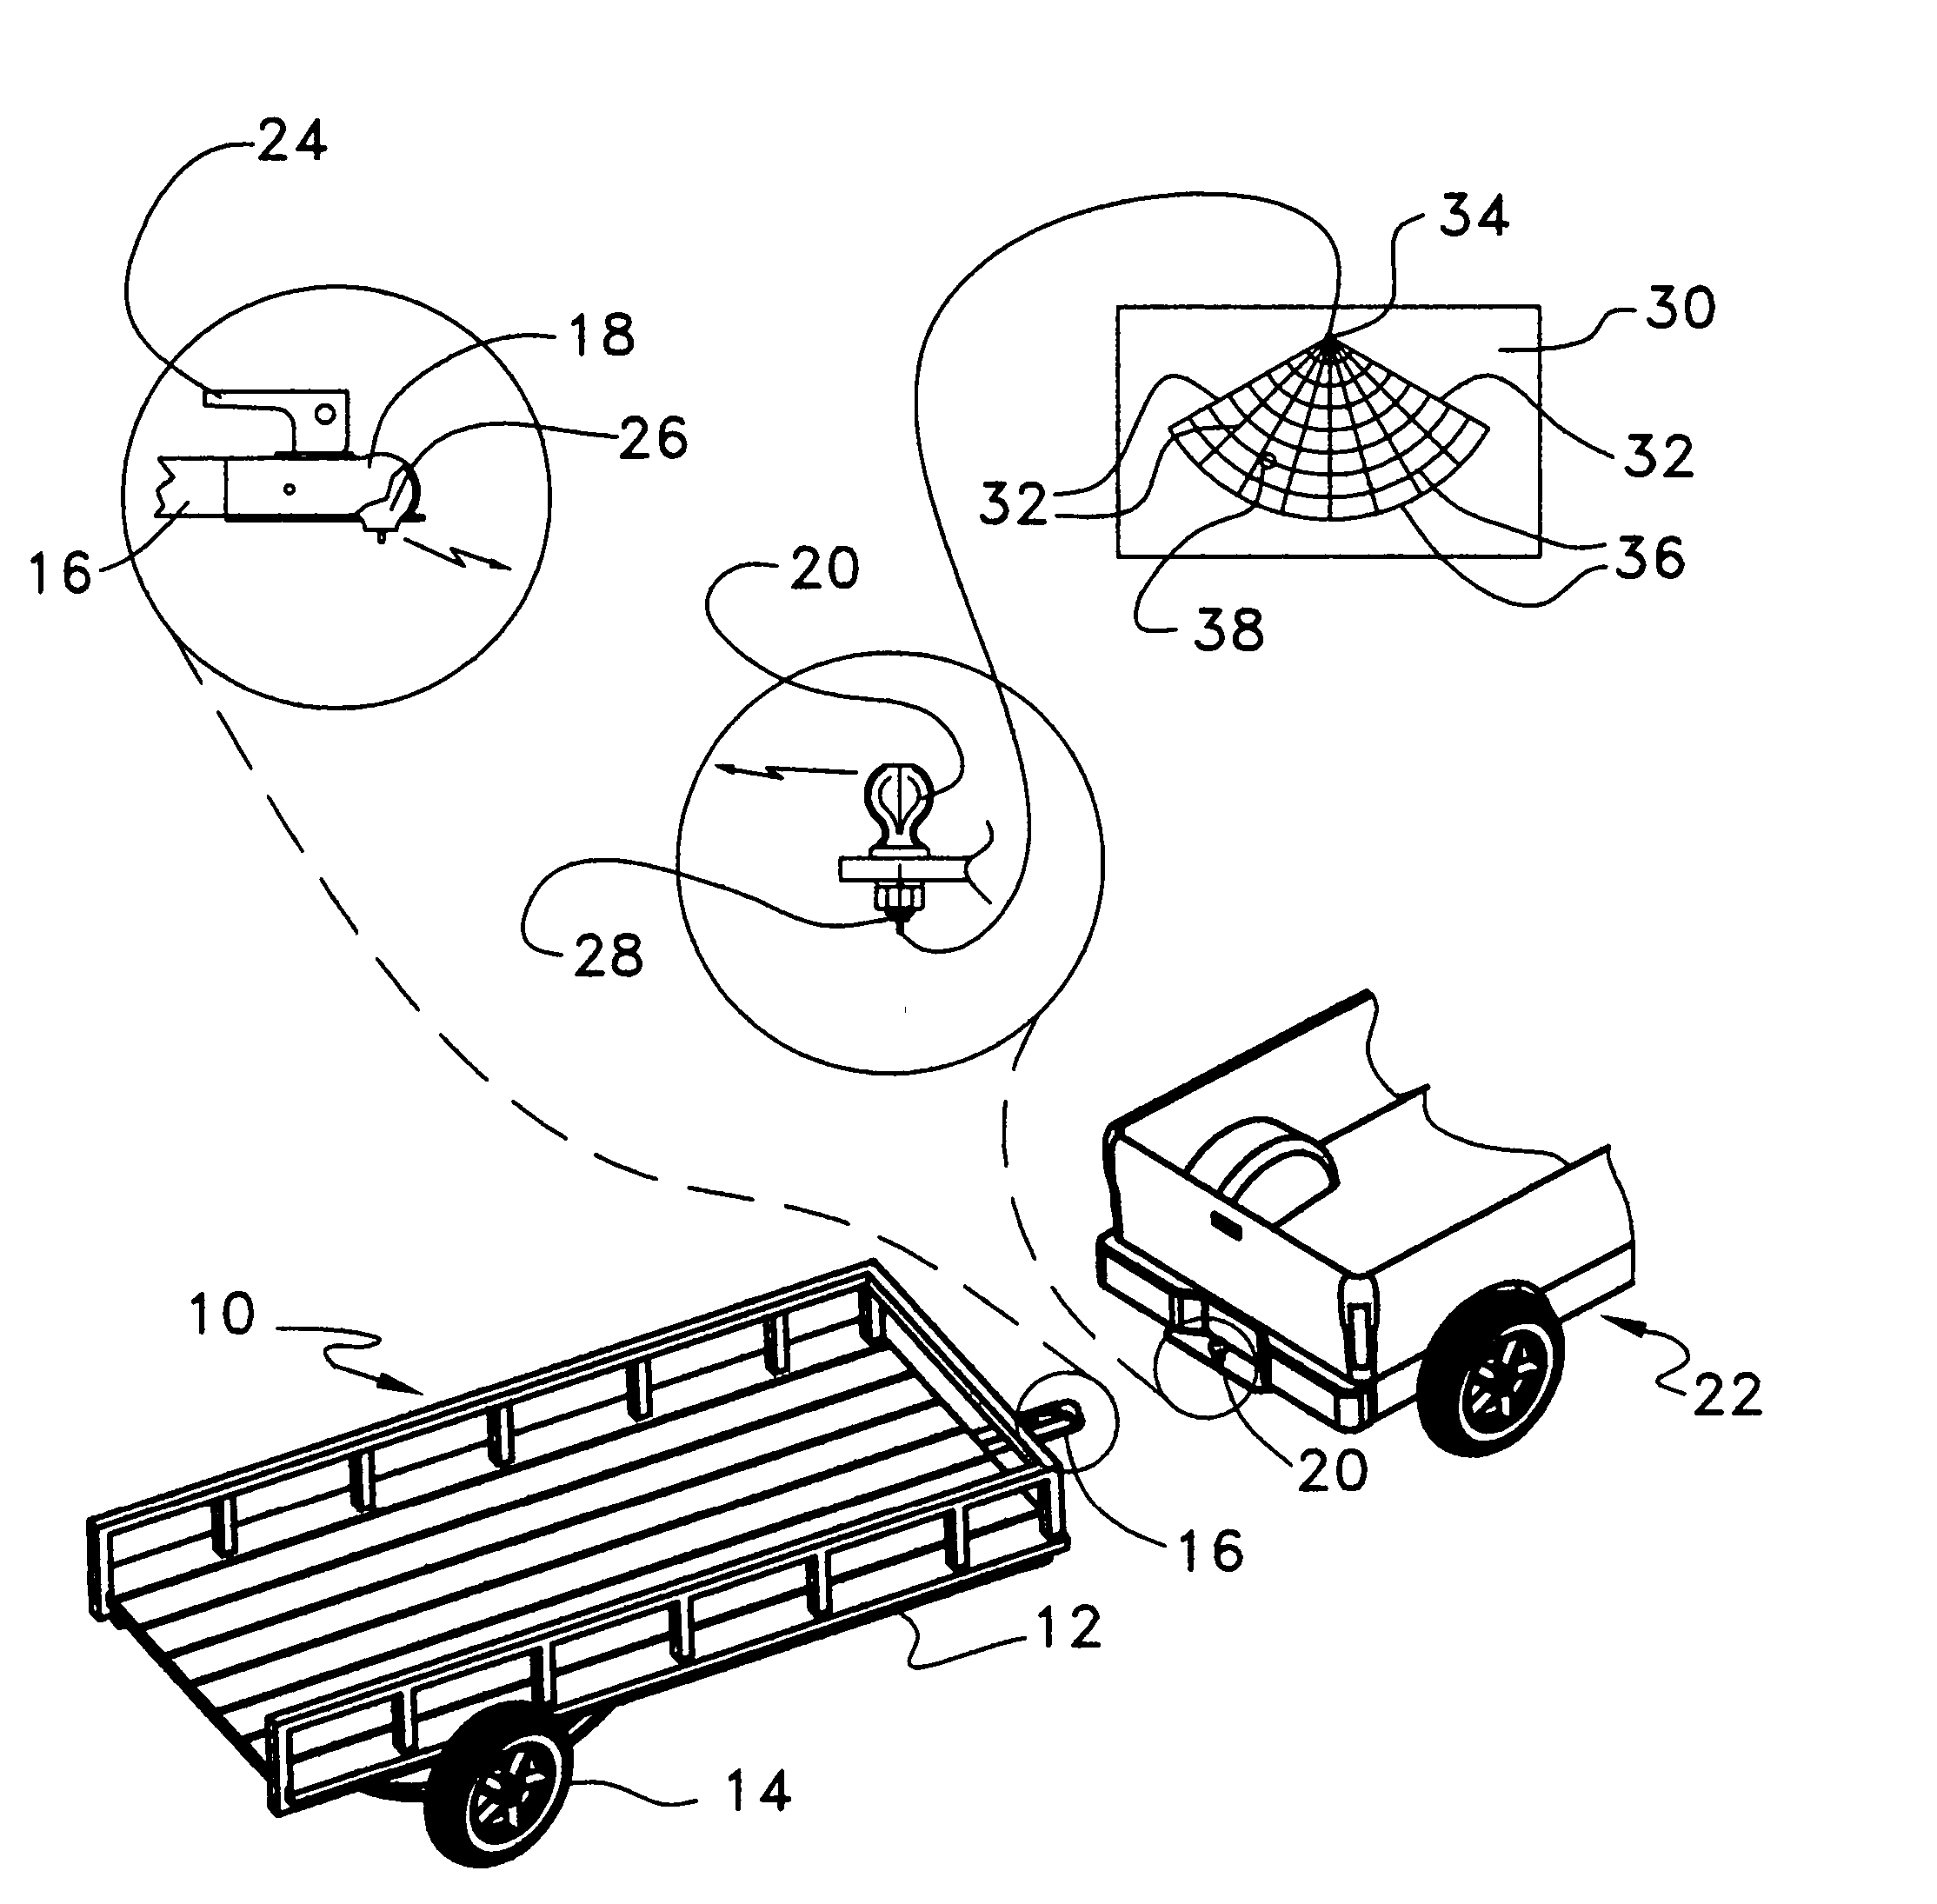 Device and method to facilitate coupling of a hitch